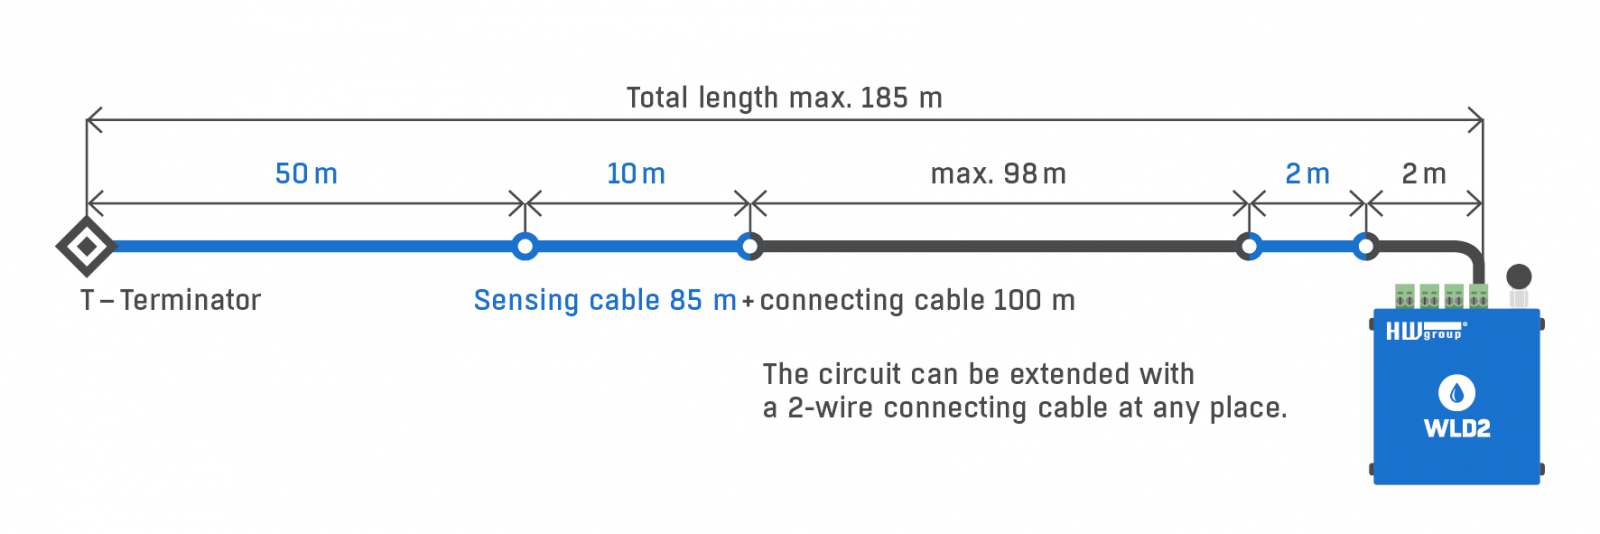 WLD2 supports up to 4 independent sensing cables. This makes it easier to locate the source of the leak. Each detection circuit can consist of up to 85m of sensing cable + up to 100m of connecting cable.